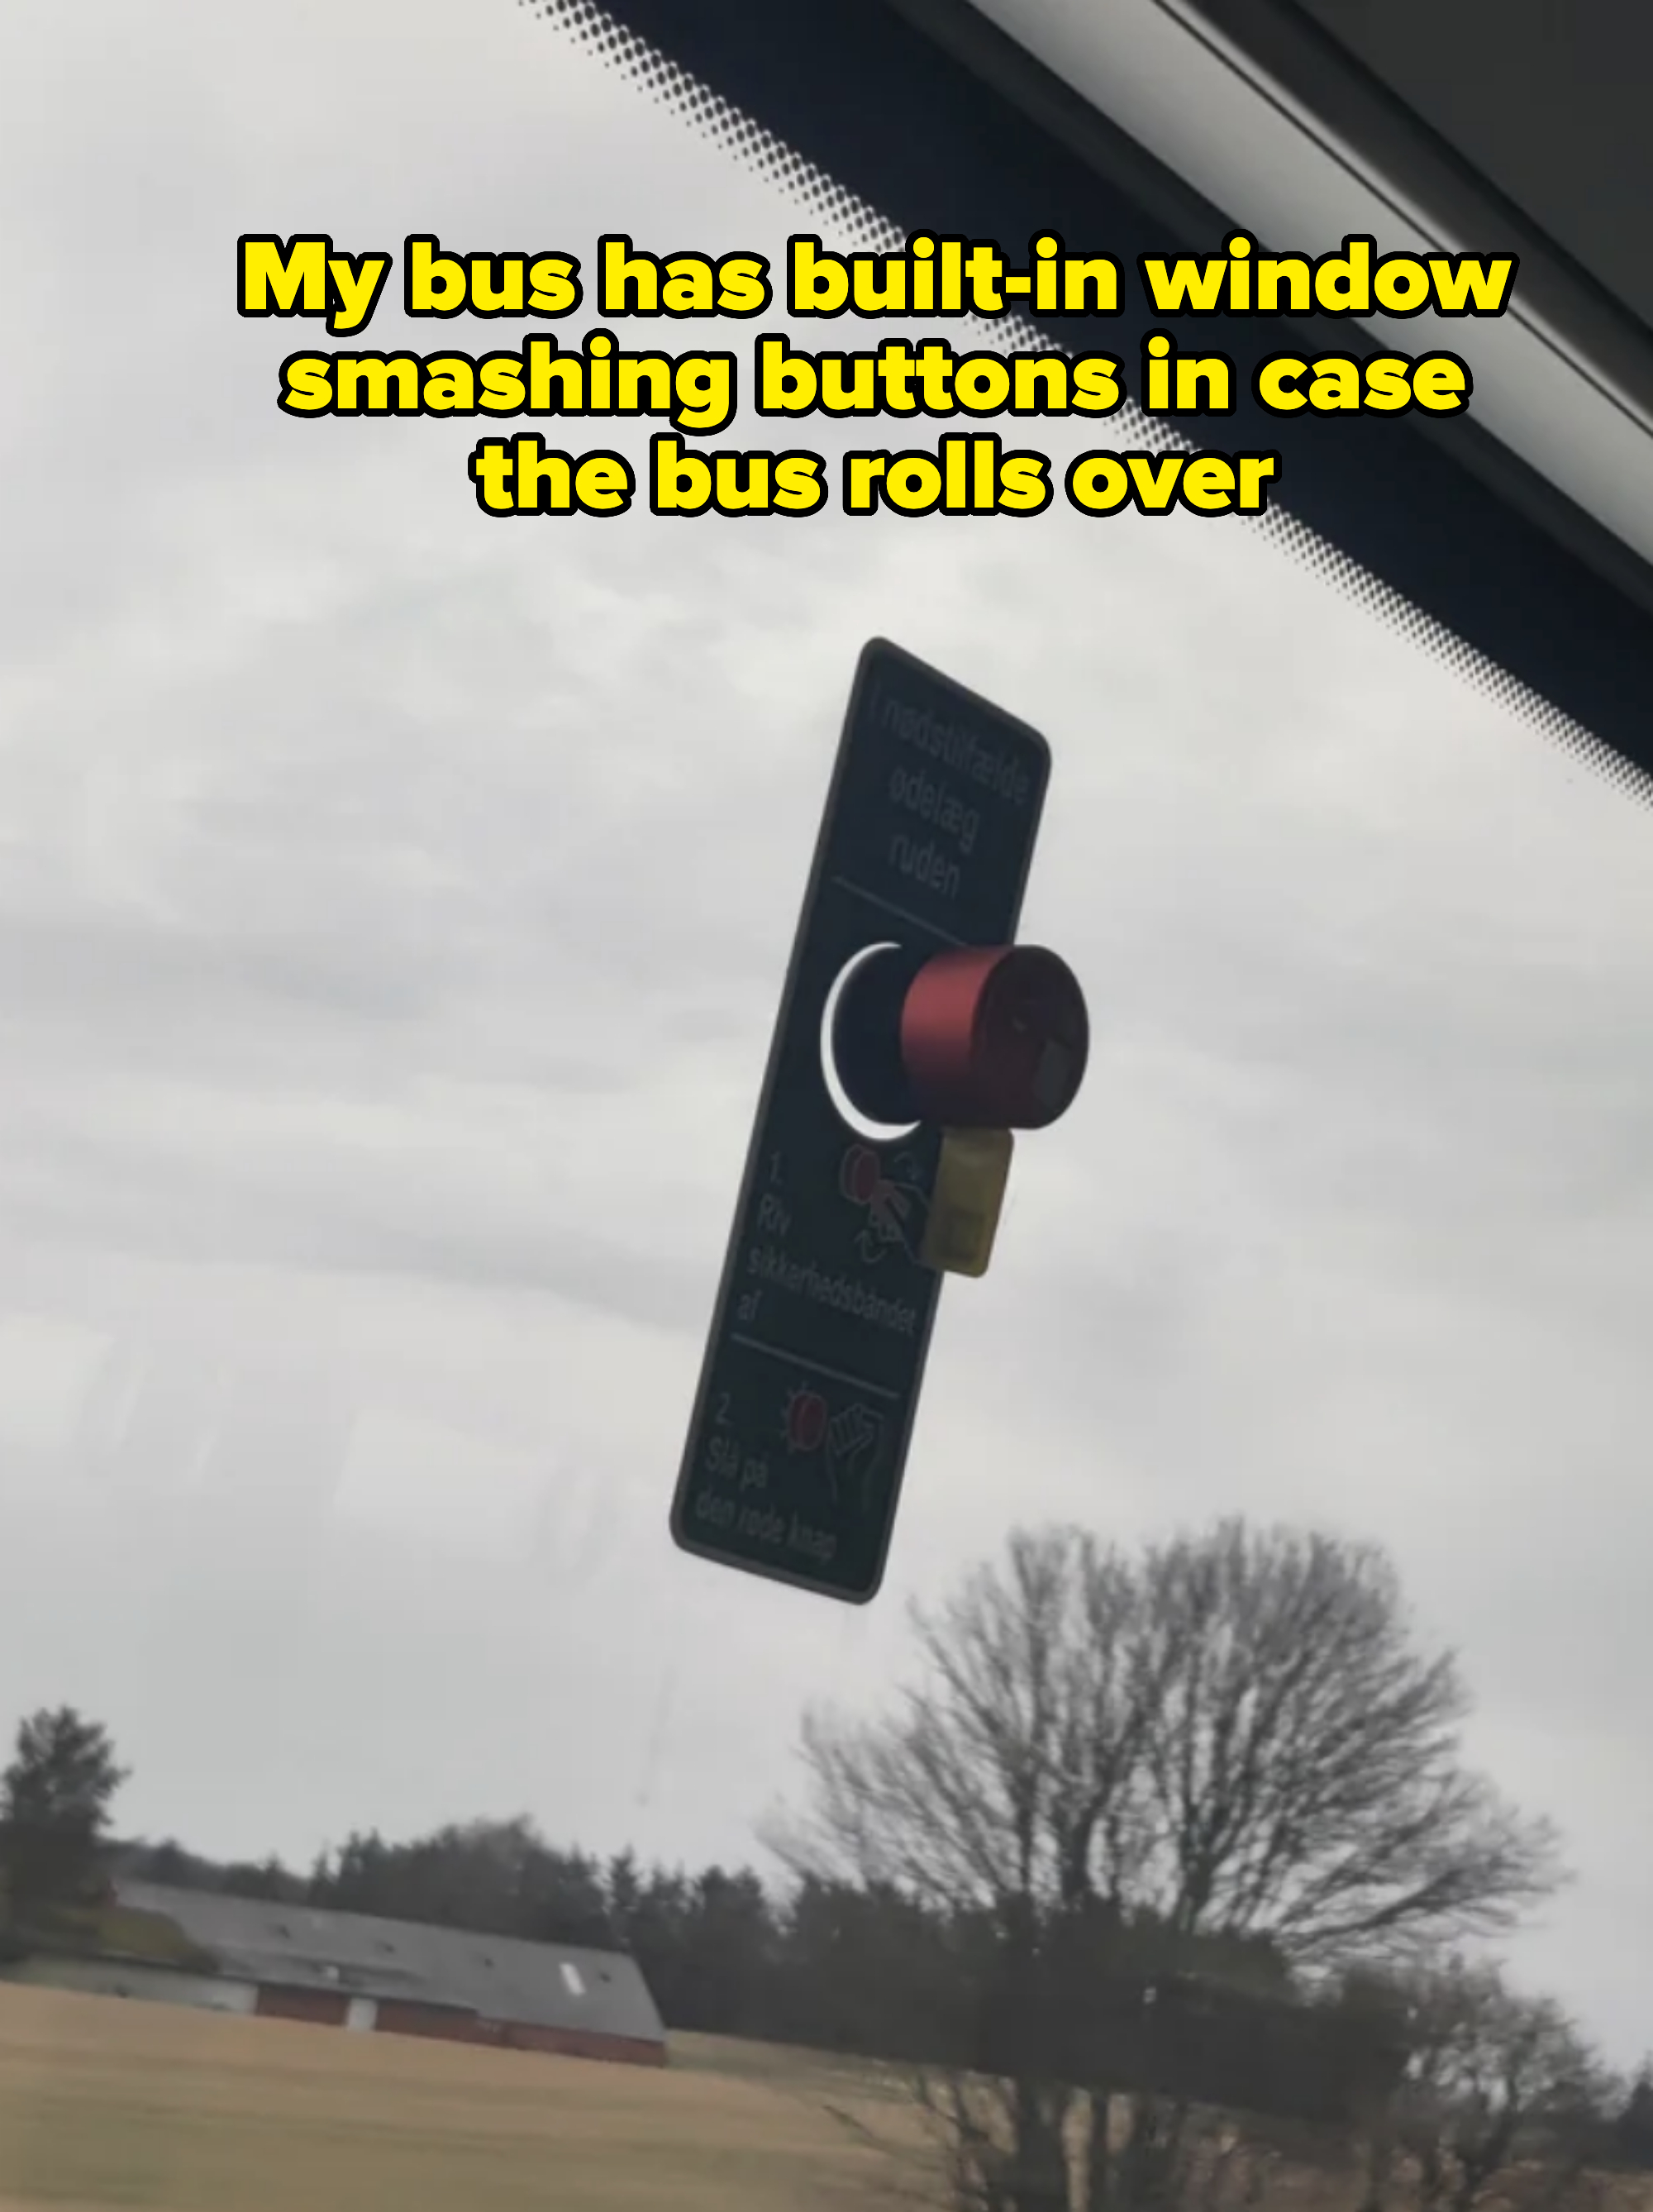 Bus glass button in the middle of the window